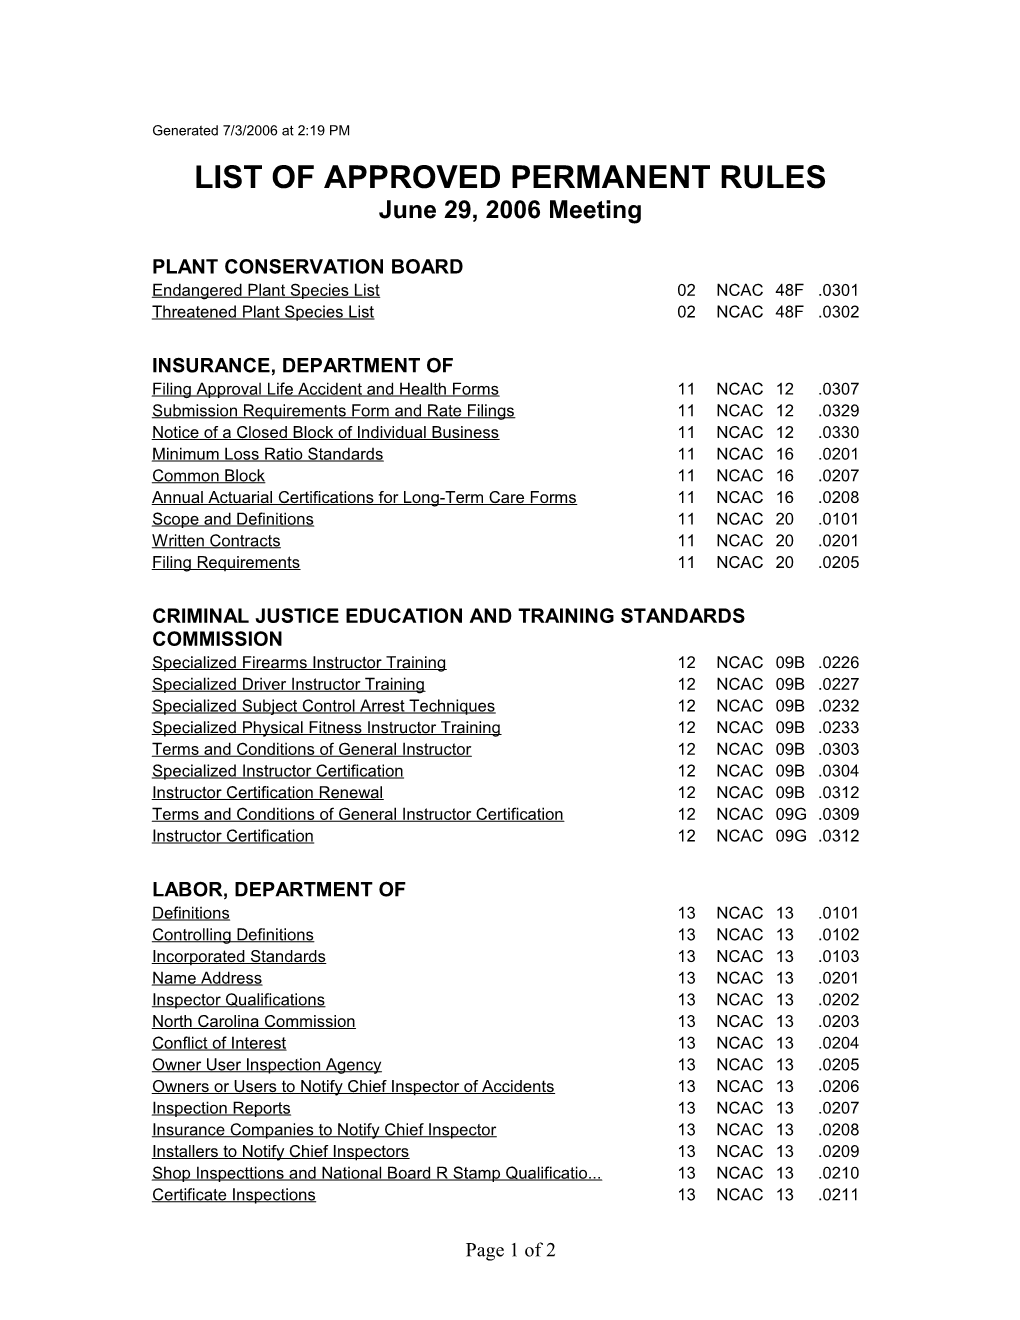 List of Approved Permanent Rules